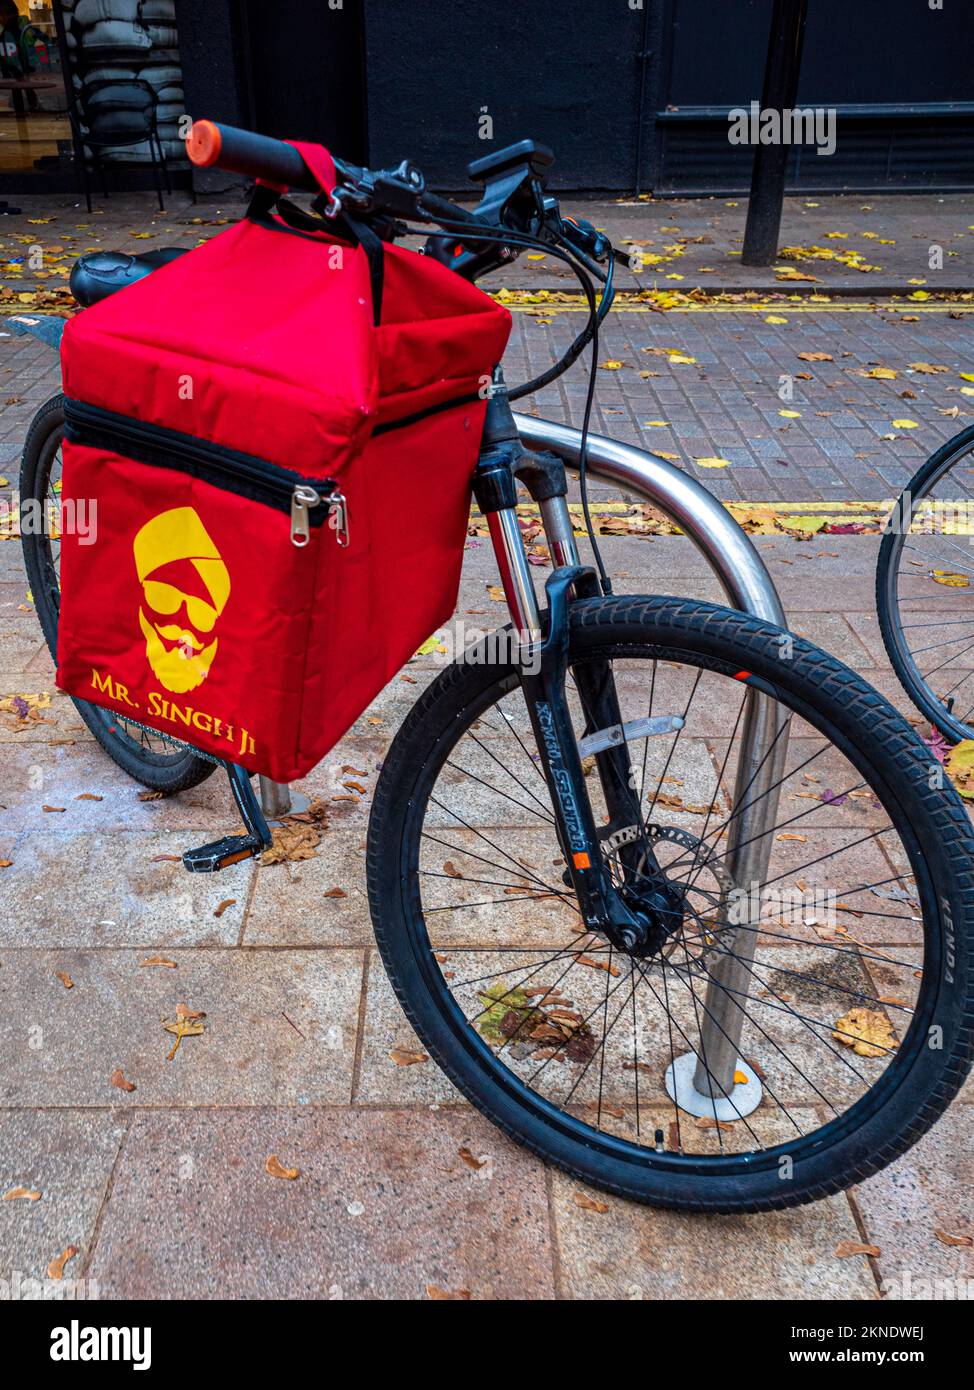 Mr. Singh Ji food delivery courier bag on a courier bike in London. Mr. Singh Ji is a specialised company making food delivery courier bags. Stock Photo